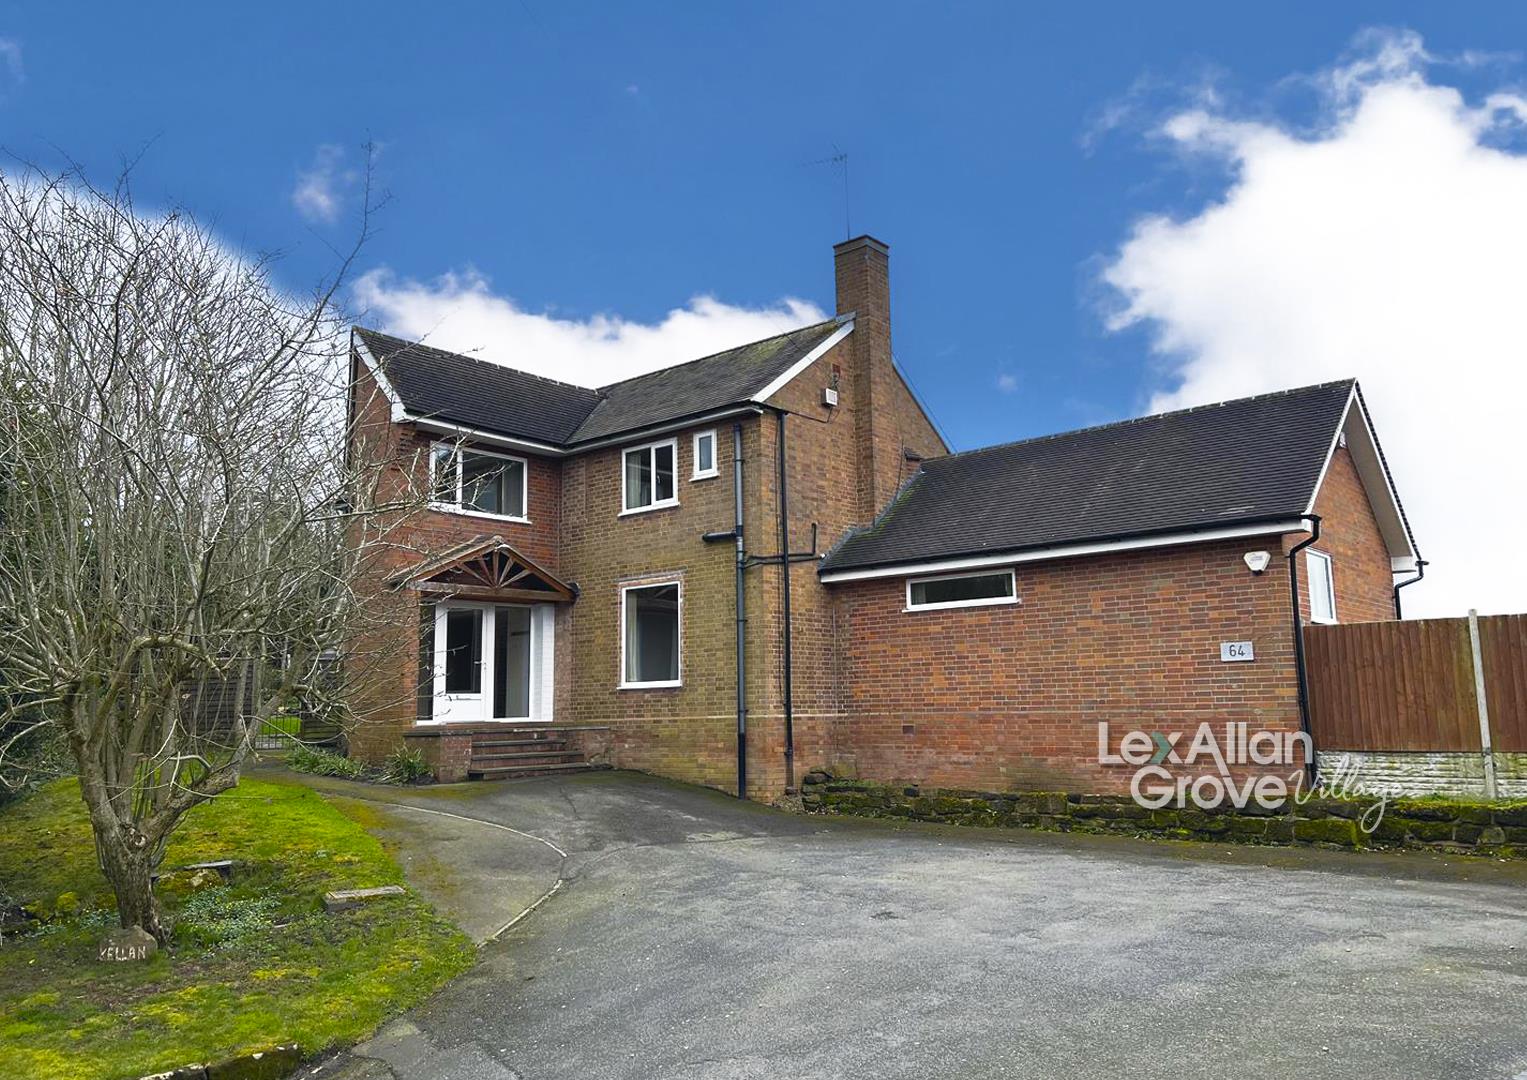 4 bed detached house for sale in Hartle Lane, Stourbridge - Property Image 1